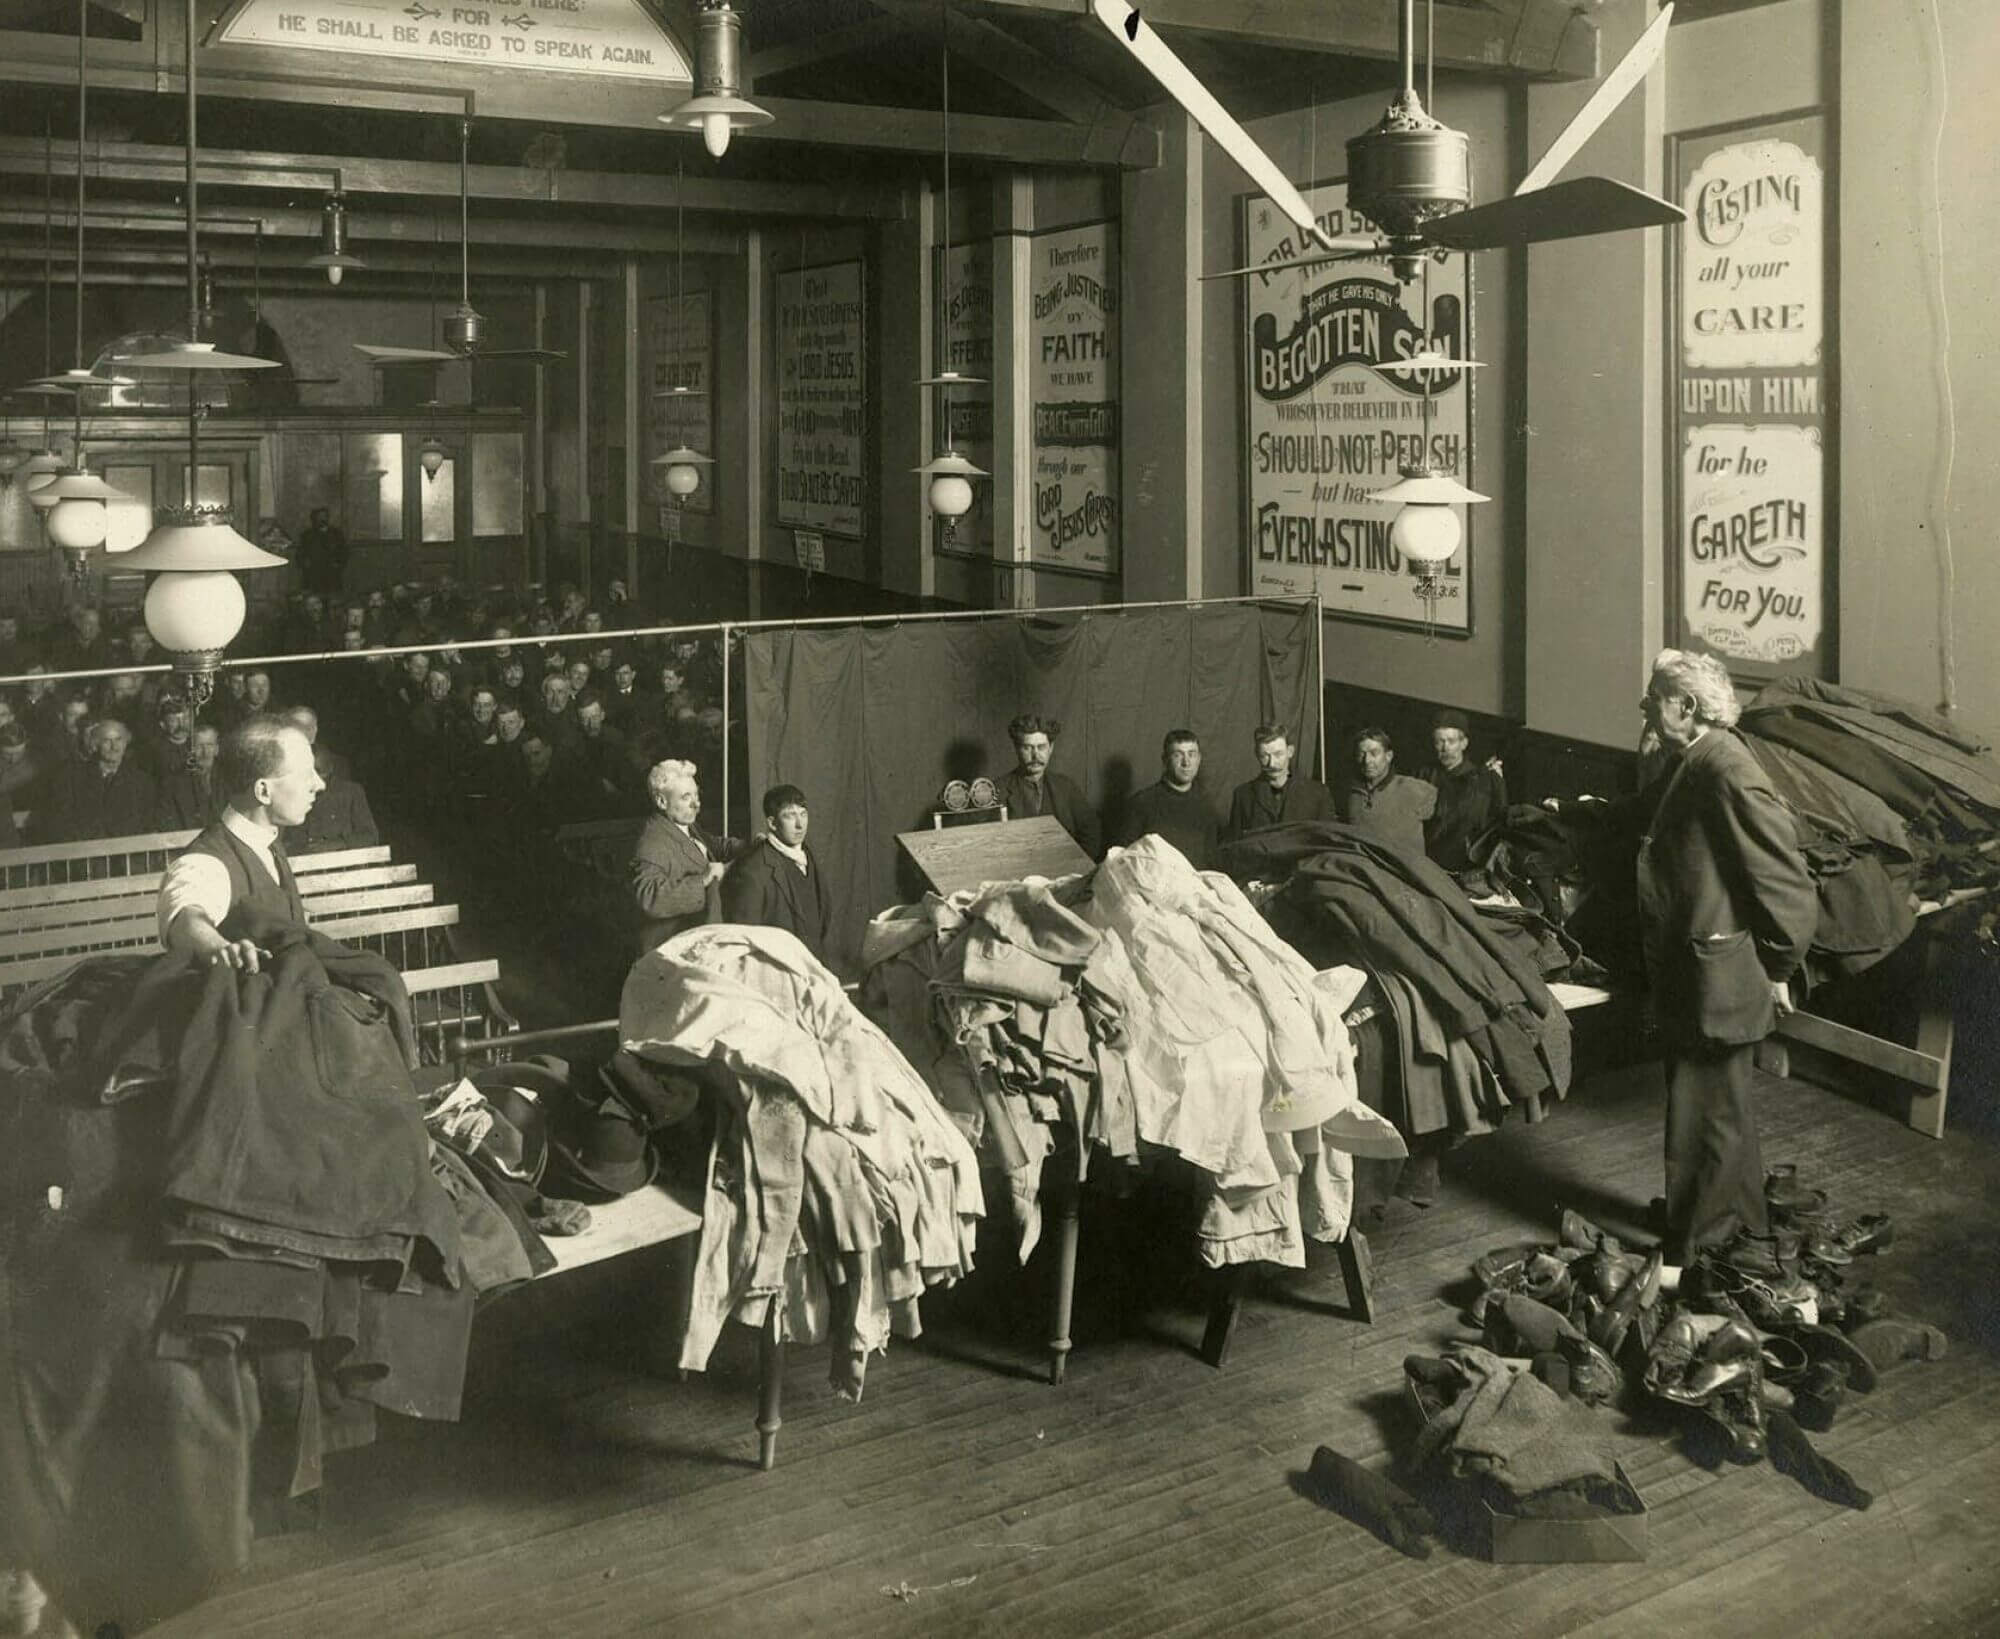 A group of men sitting in a room. In the front is a line of men waiting to go up to an area with clothes. More men are standing with with tables full of clothing (shirts, pants, and shoes).